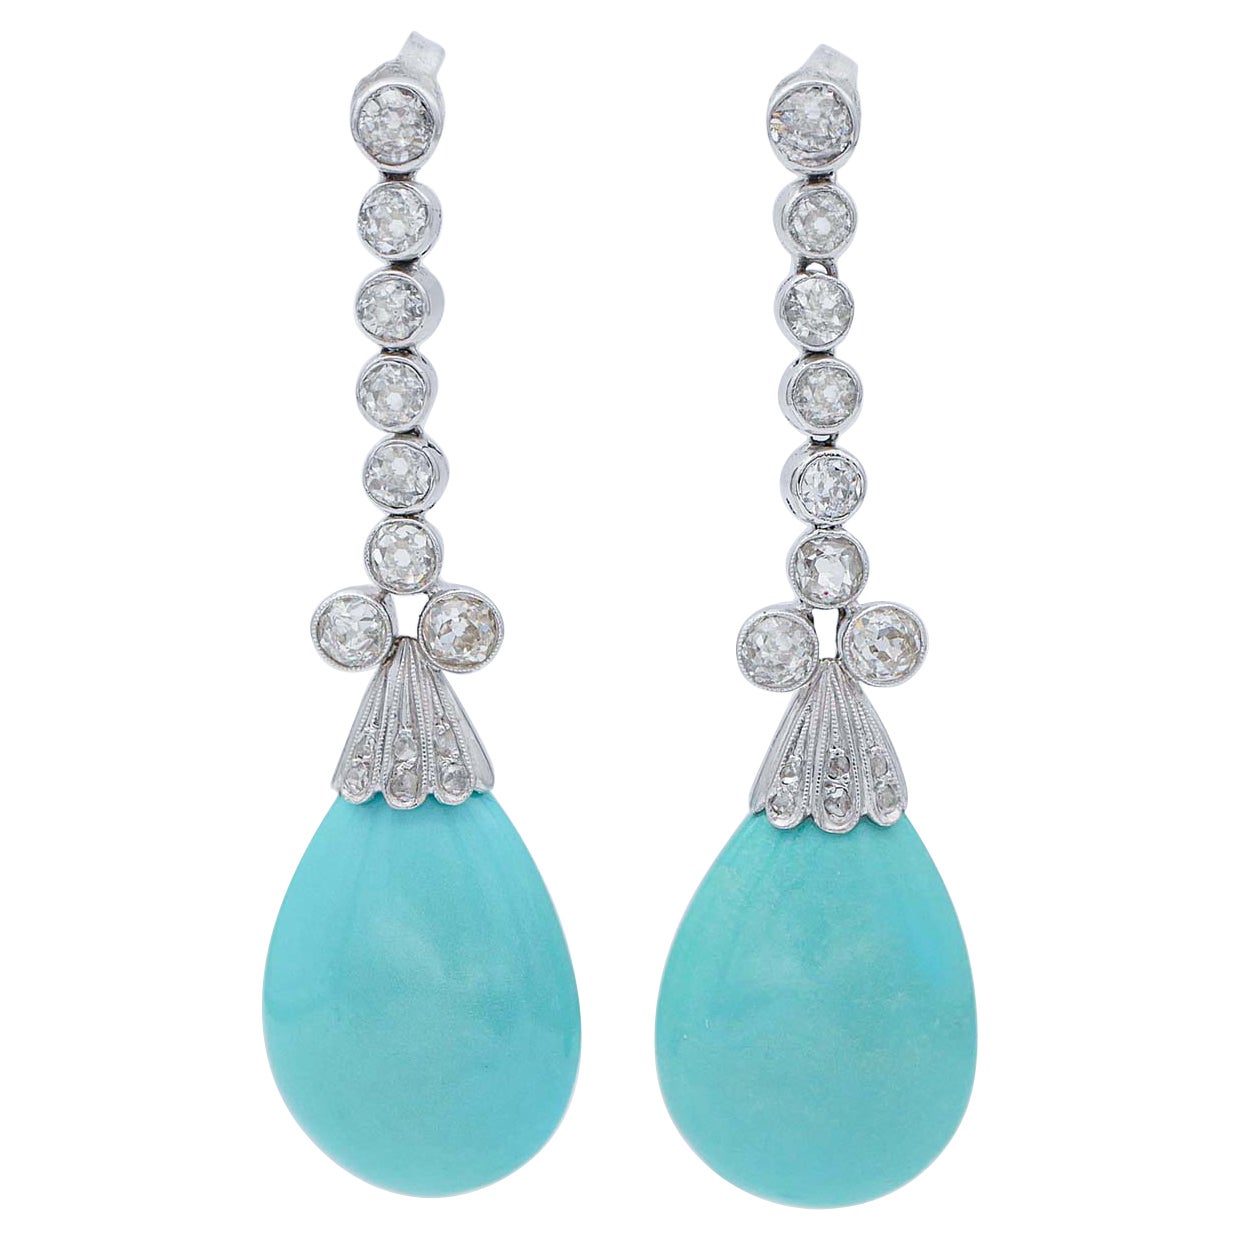 Turquoise, Diamonds, White Gold and Silver Dangle Earrings